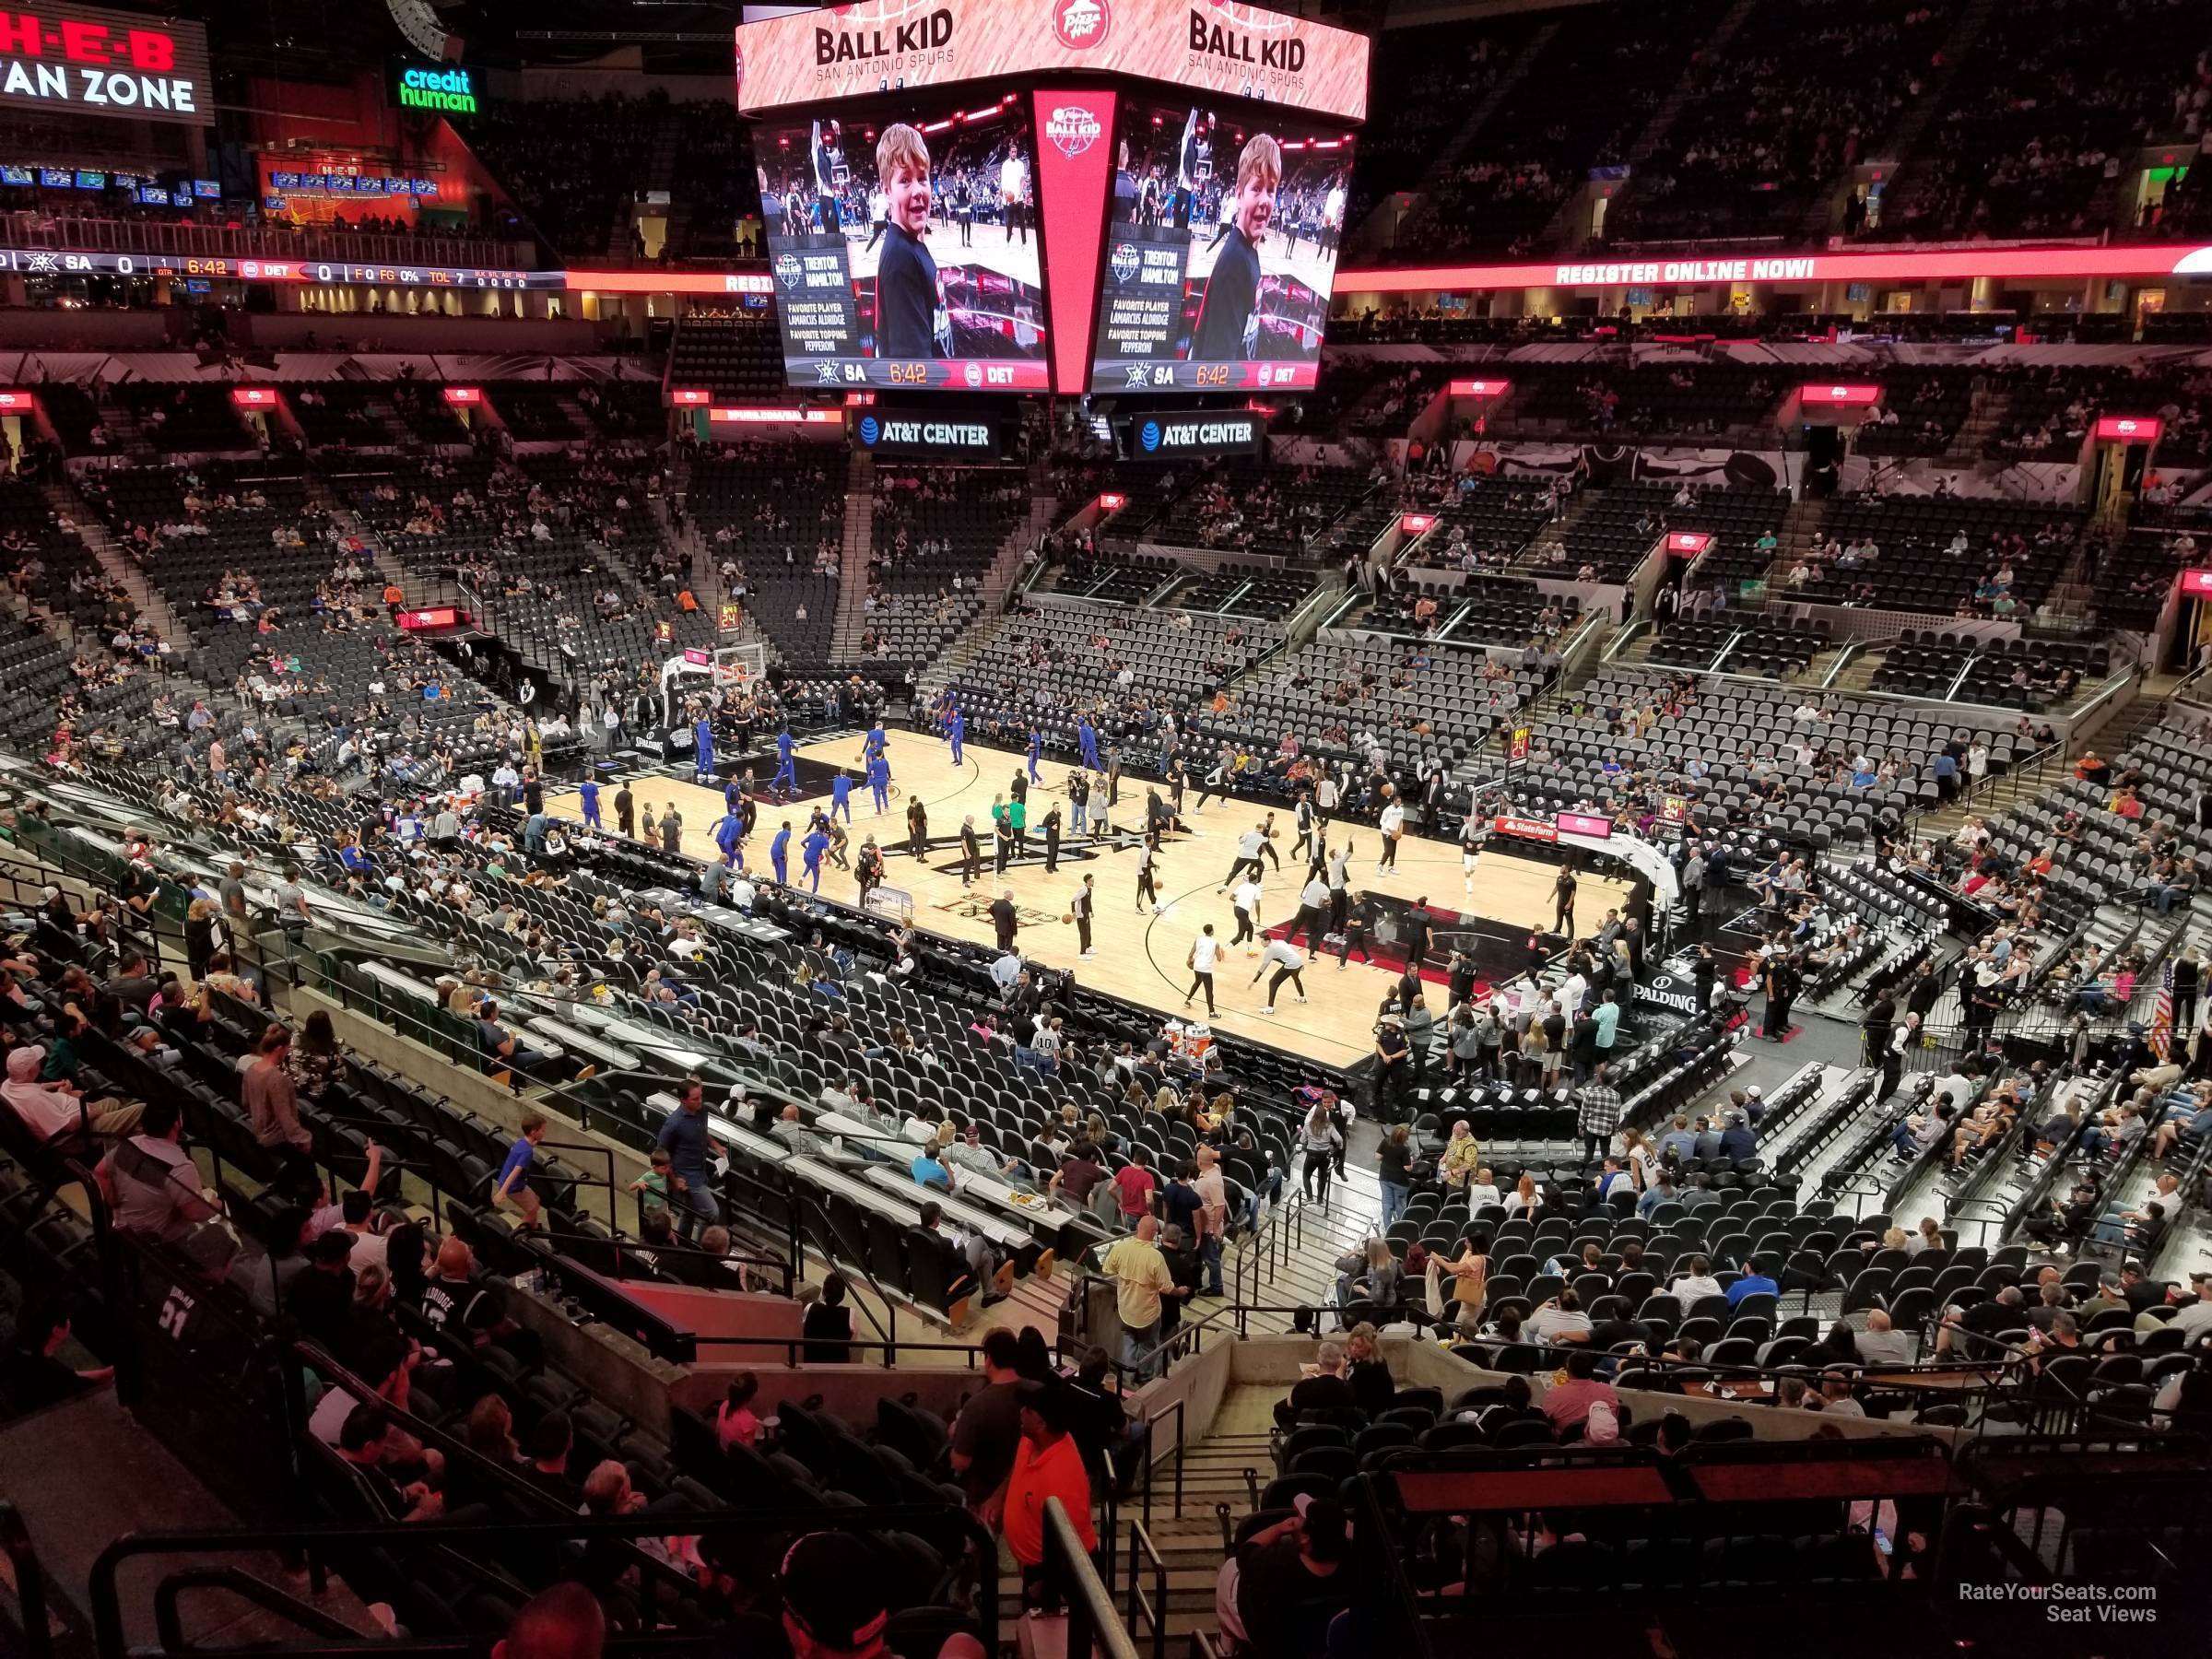 section 104, row 33 seat view  for basketball - at&t center